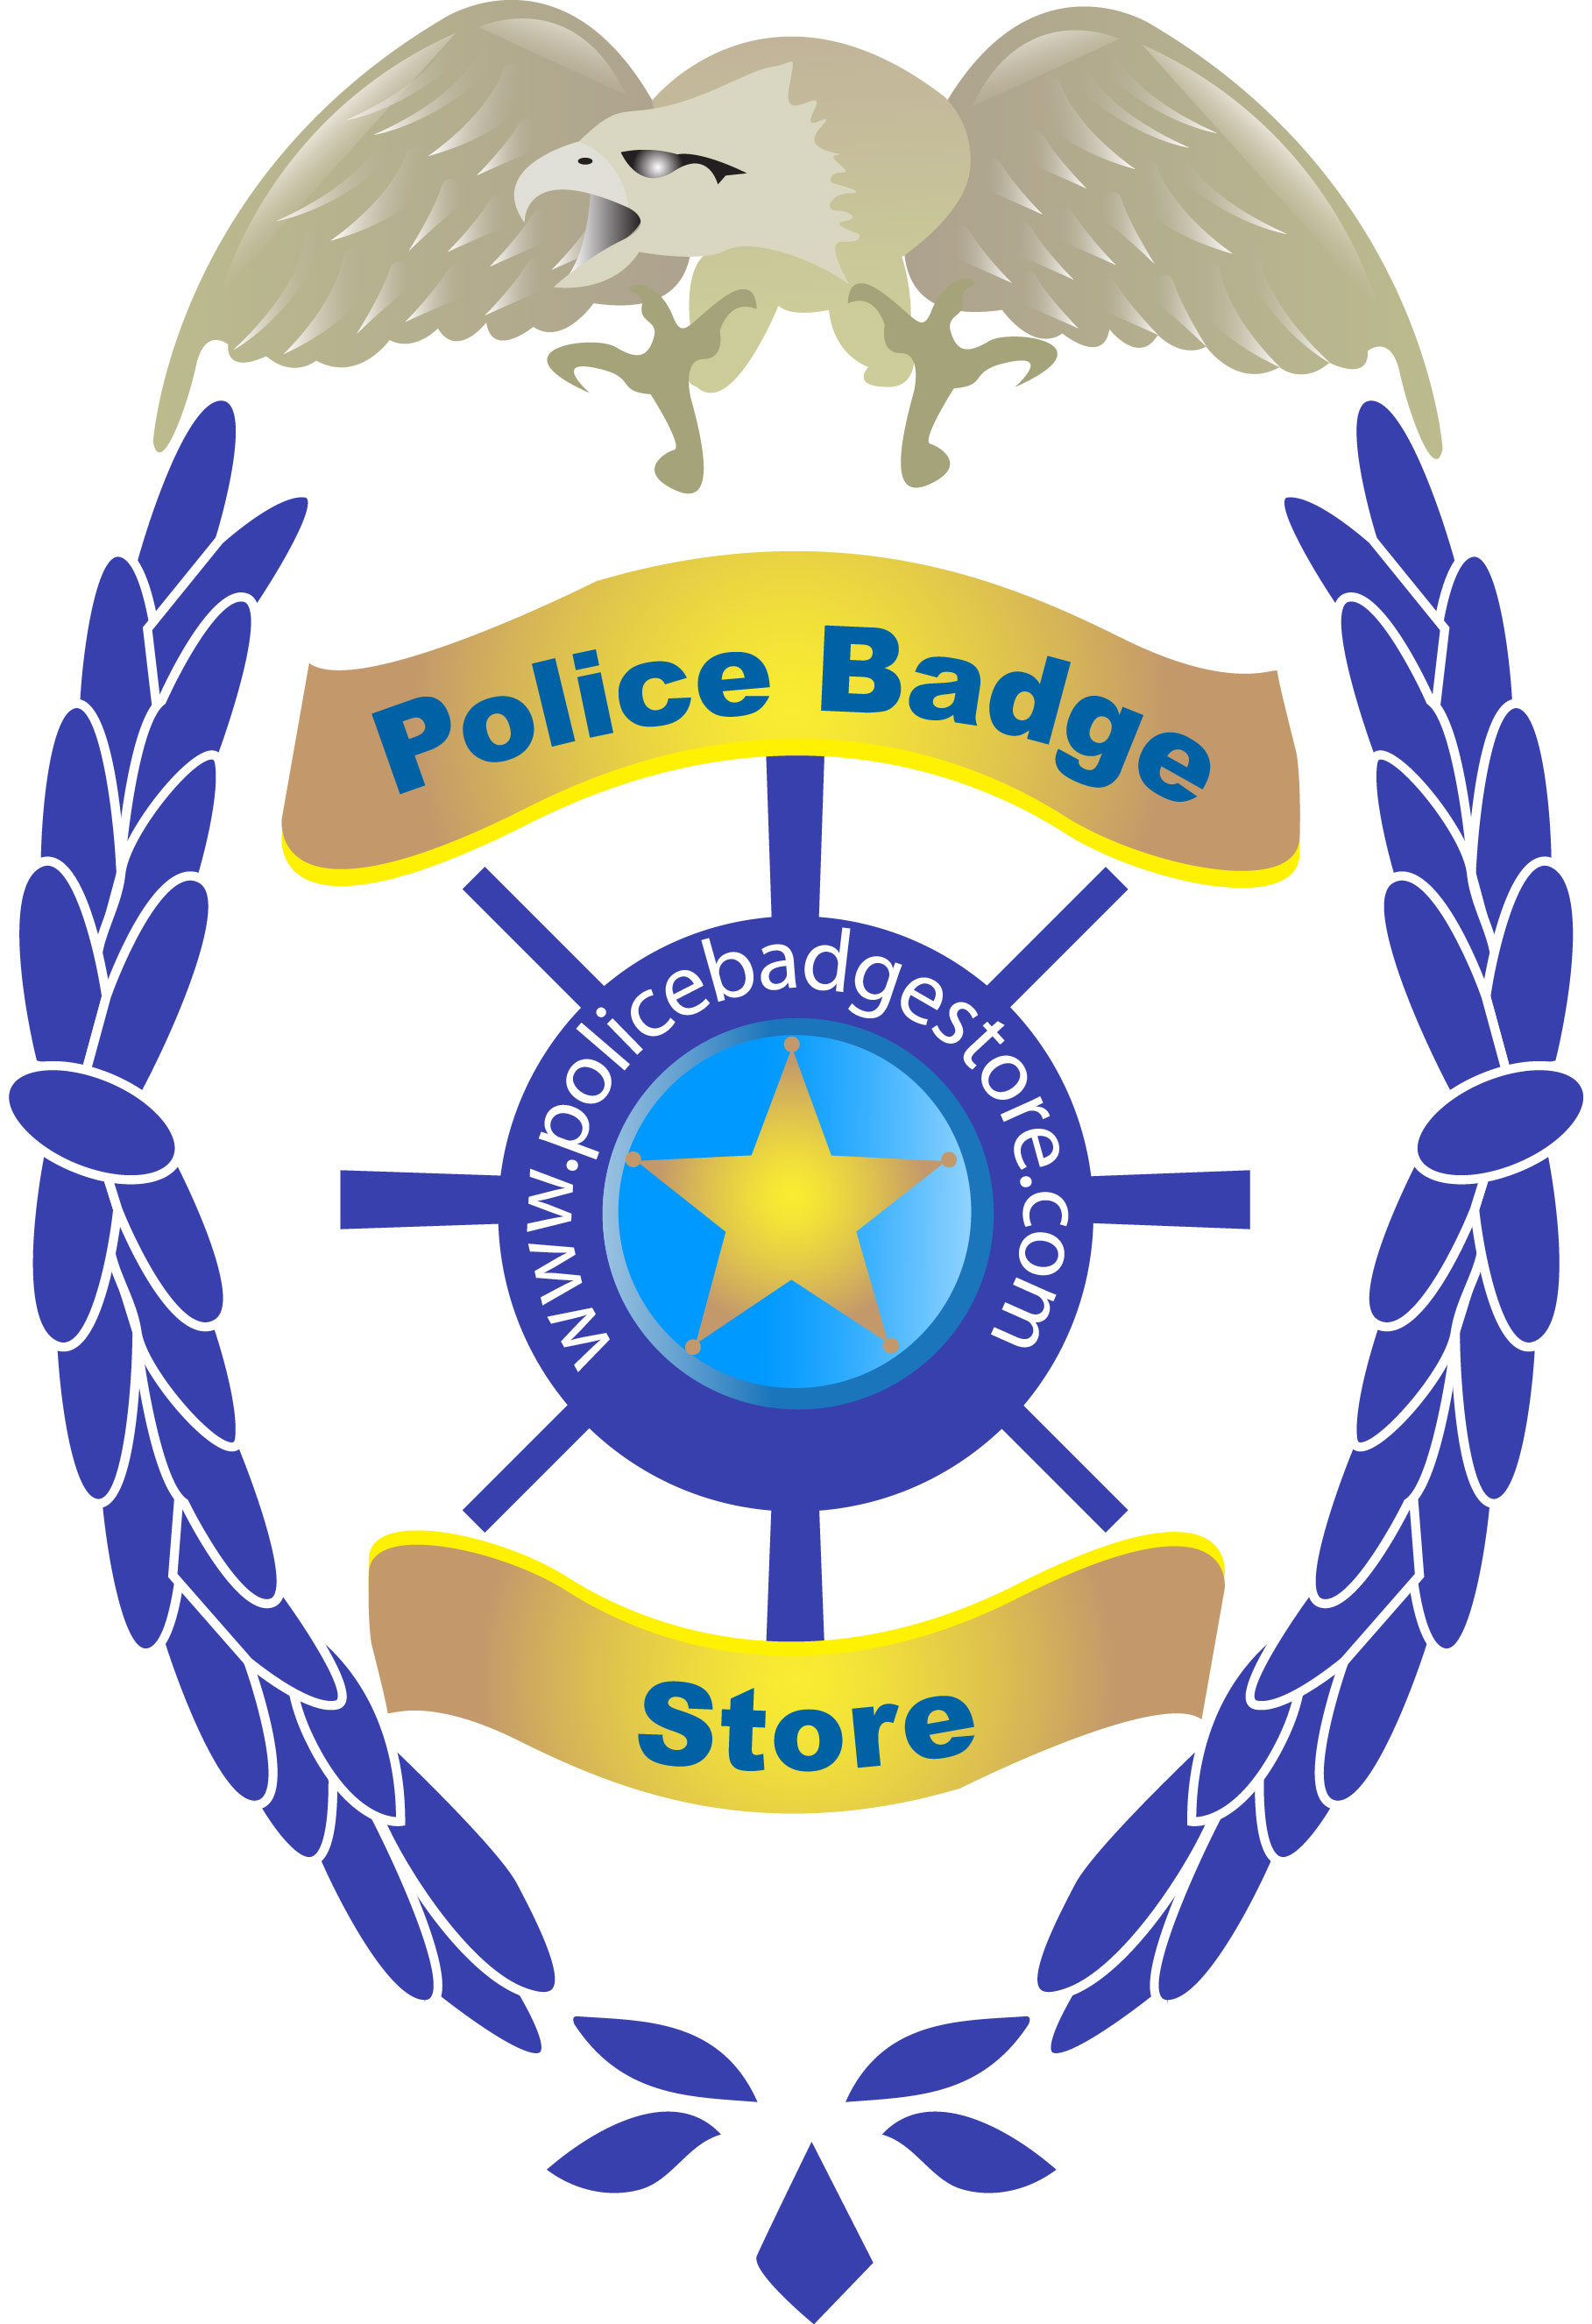 Police Badge Blank | Free download on ClipArtMag